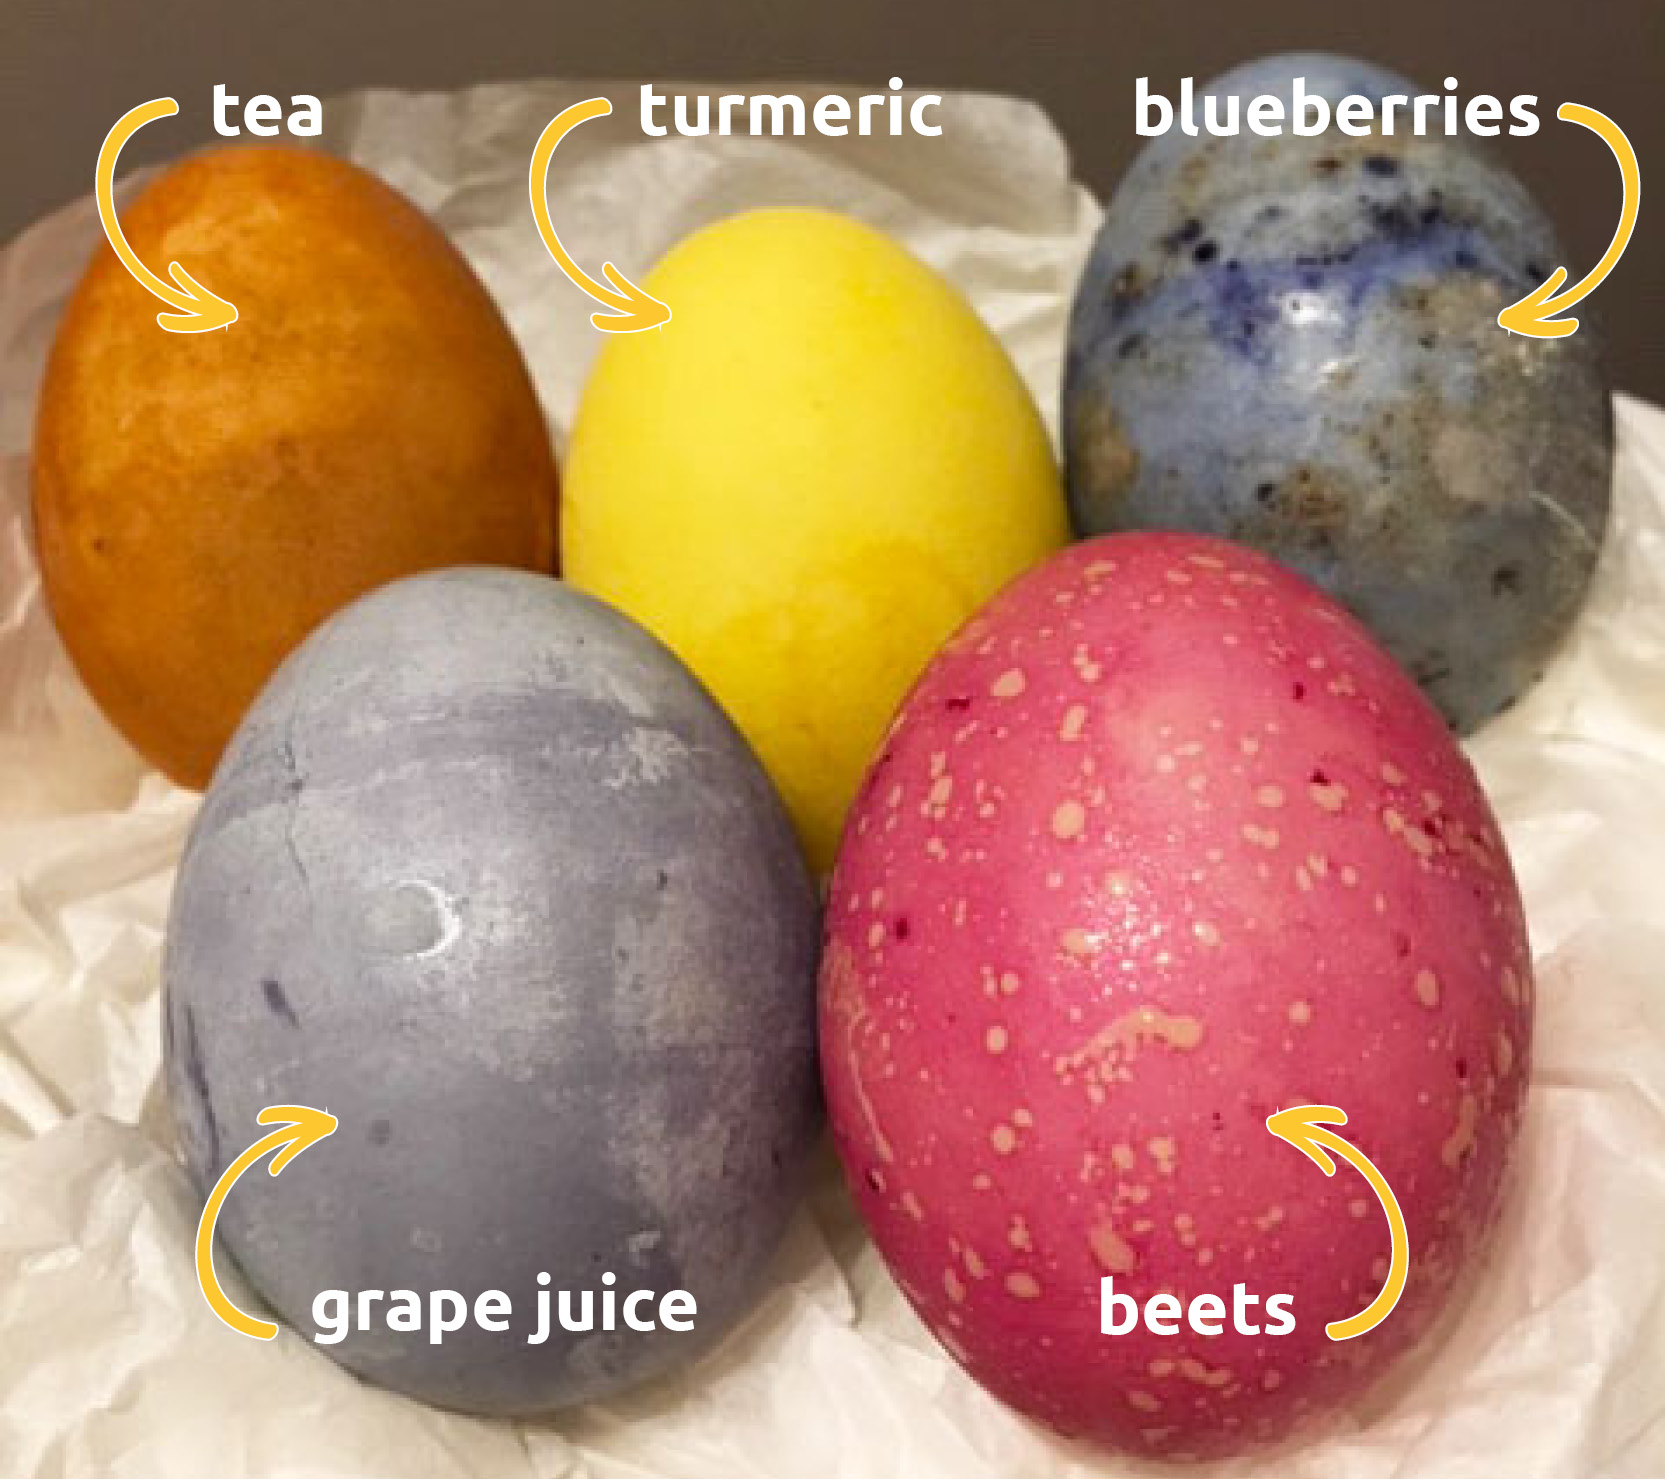 Image of naturally dyed eggs with labels